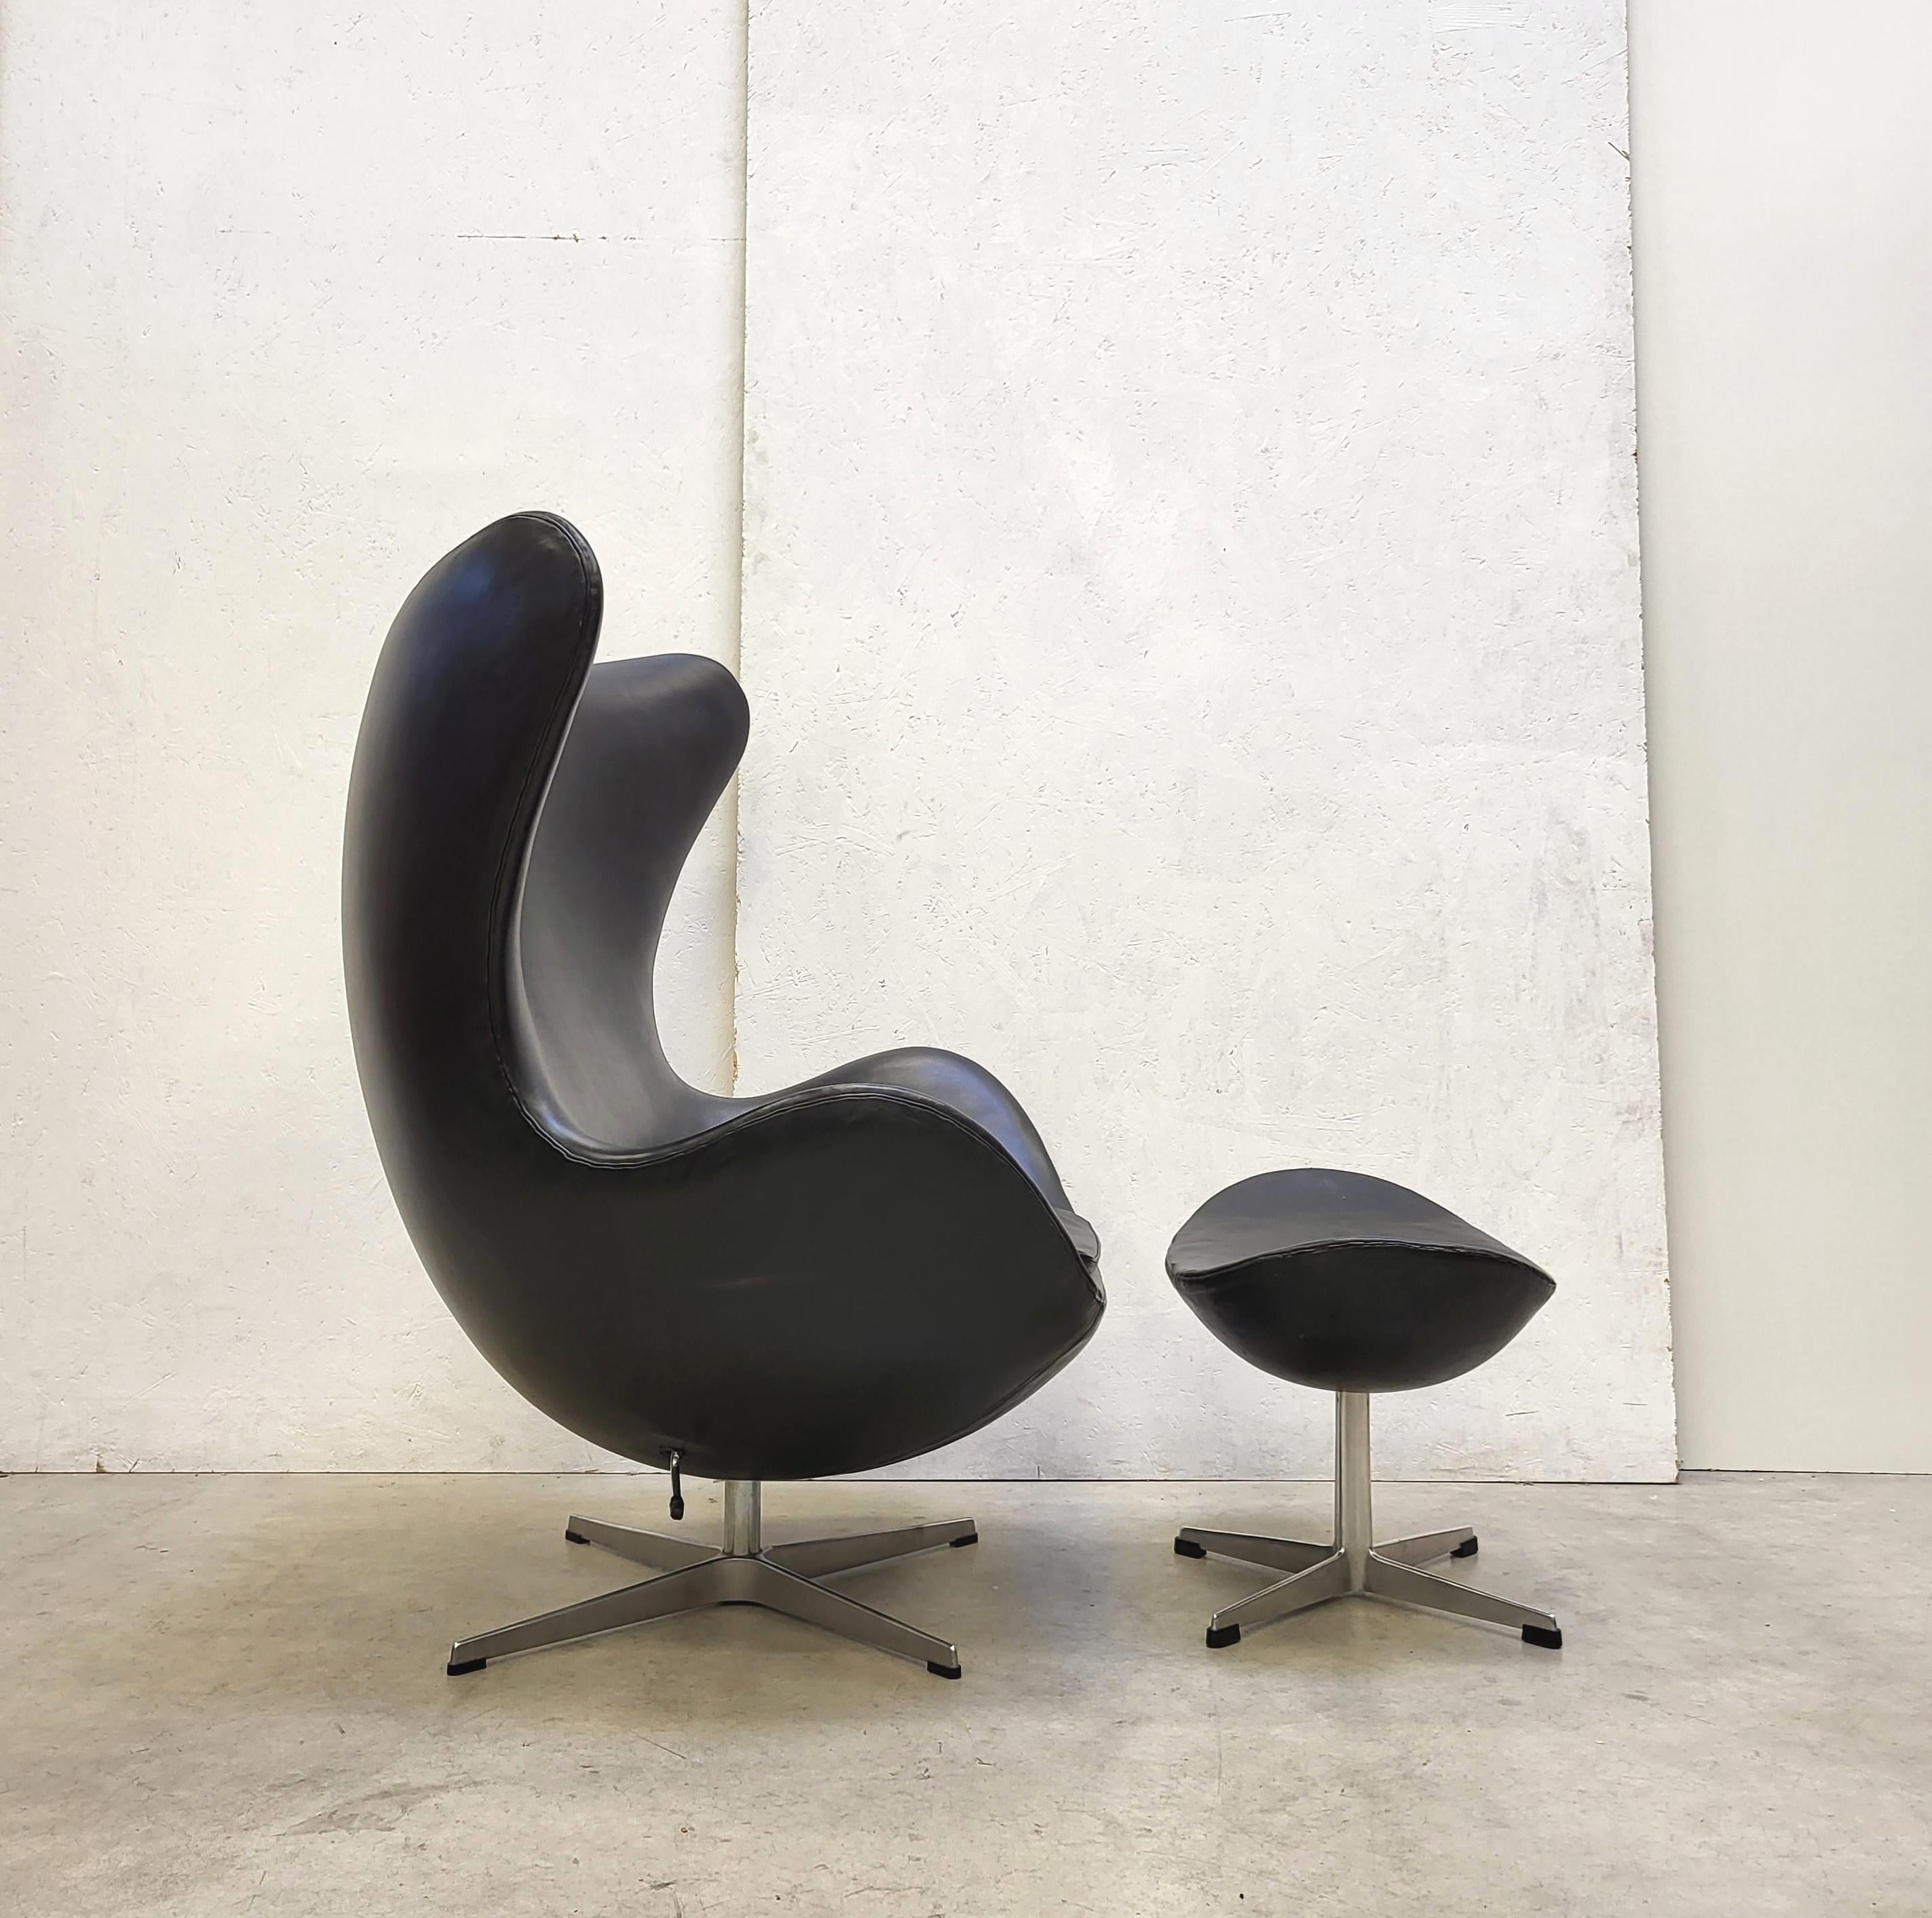 This very rare 80s edition Egg chair with ottoman was designed in the 50s by Arne Jacobsen for the SAS Hotel in Copenhagen and produced by Fritz Hansen in 1981. The Egg chair comes with a very fine black semi anilin leather.

The set features an